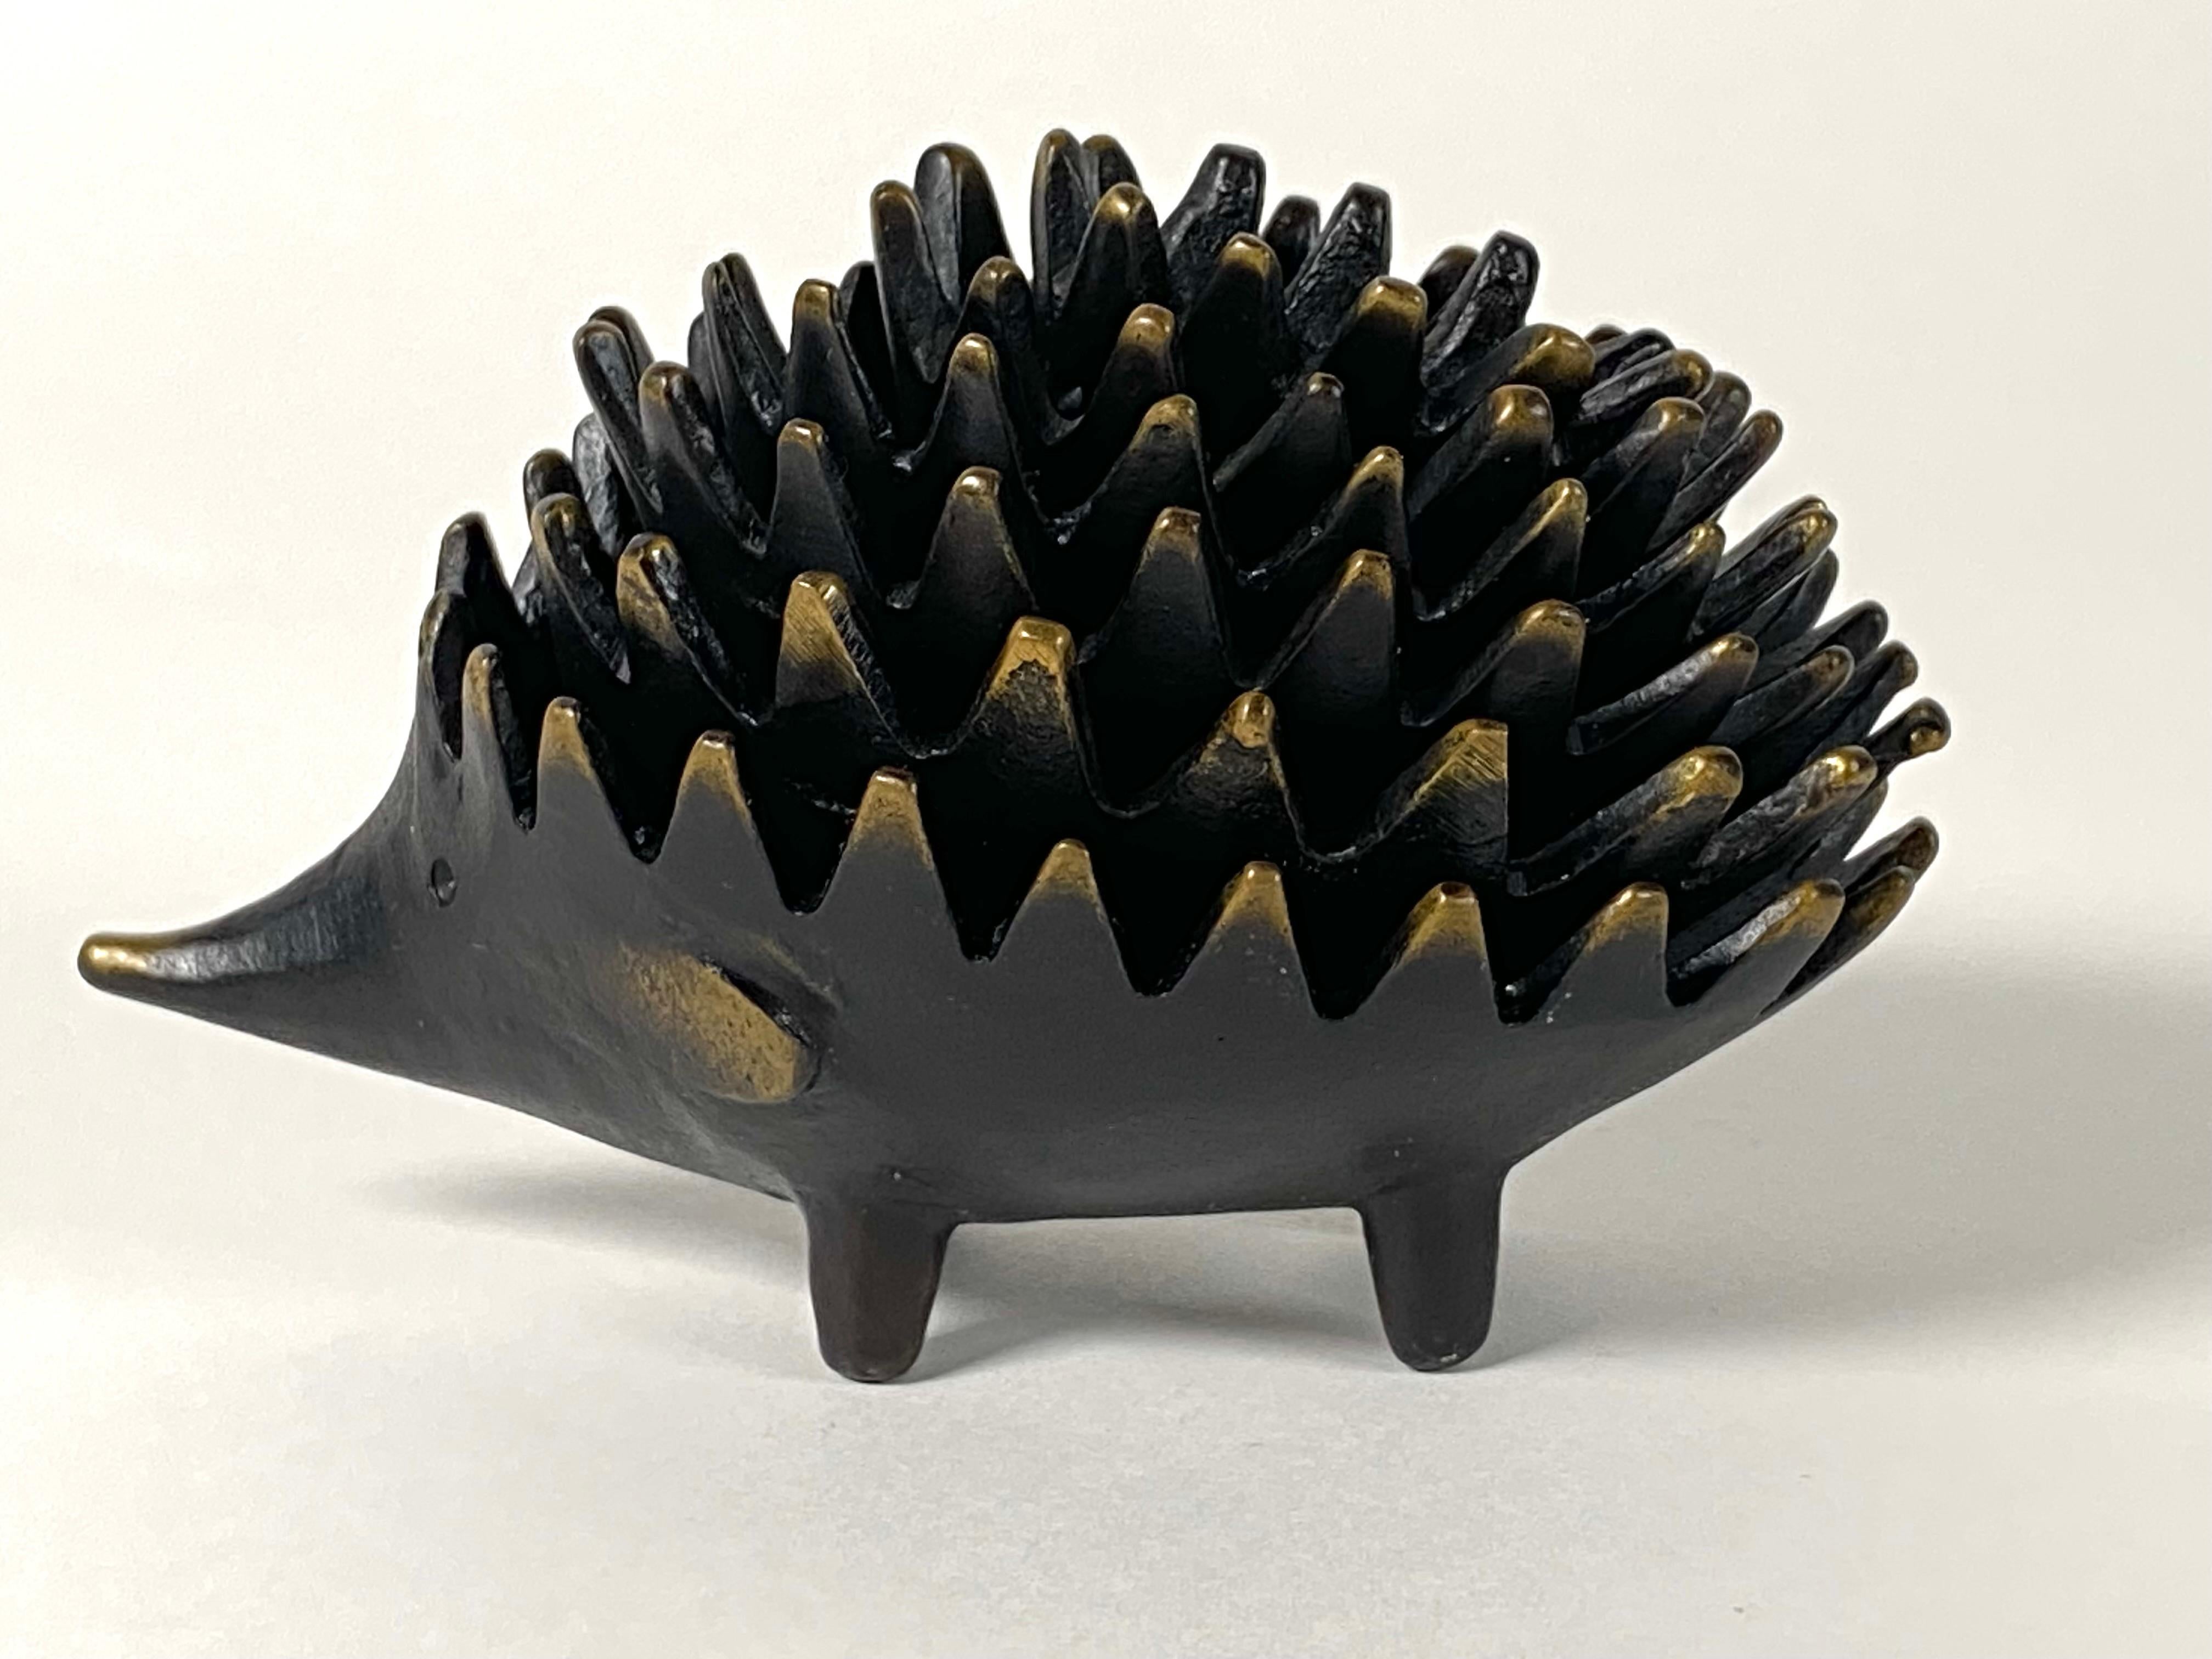 Brass stacking ashtrays in the form of a hedgehog designed by Walter Bosse of Austria circa 1950s. The hedgehog sculpture consists of 6 pieces 5 of which can be used as an ashtray, the spines alone the edges are designed to hold the cigarette.